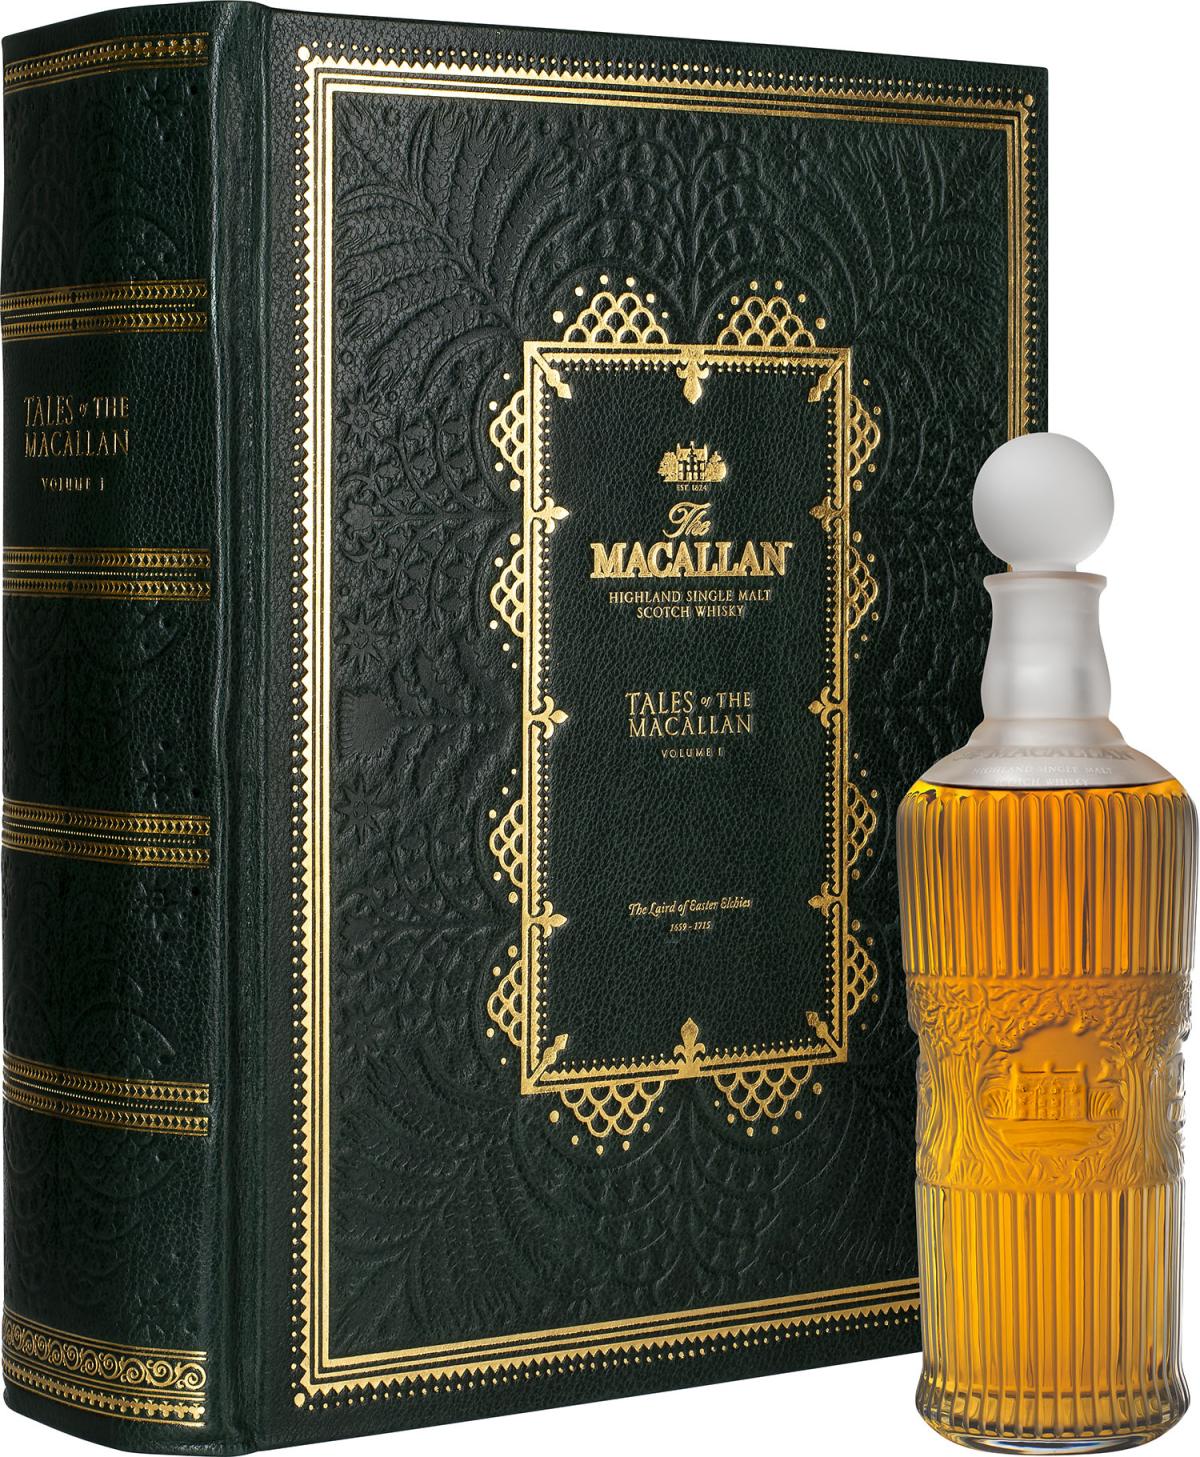 Tales Of The Macallan Volume I (1x70cl) - TwoMoreGlasses.com